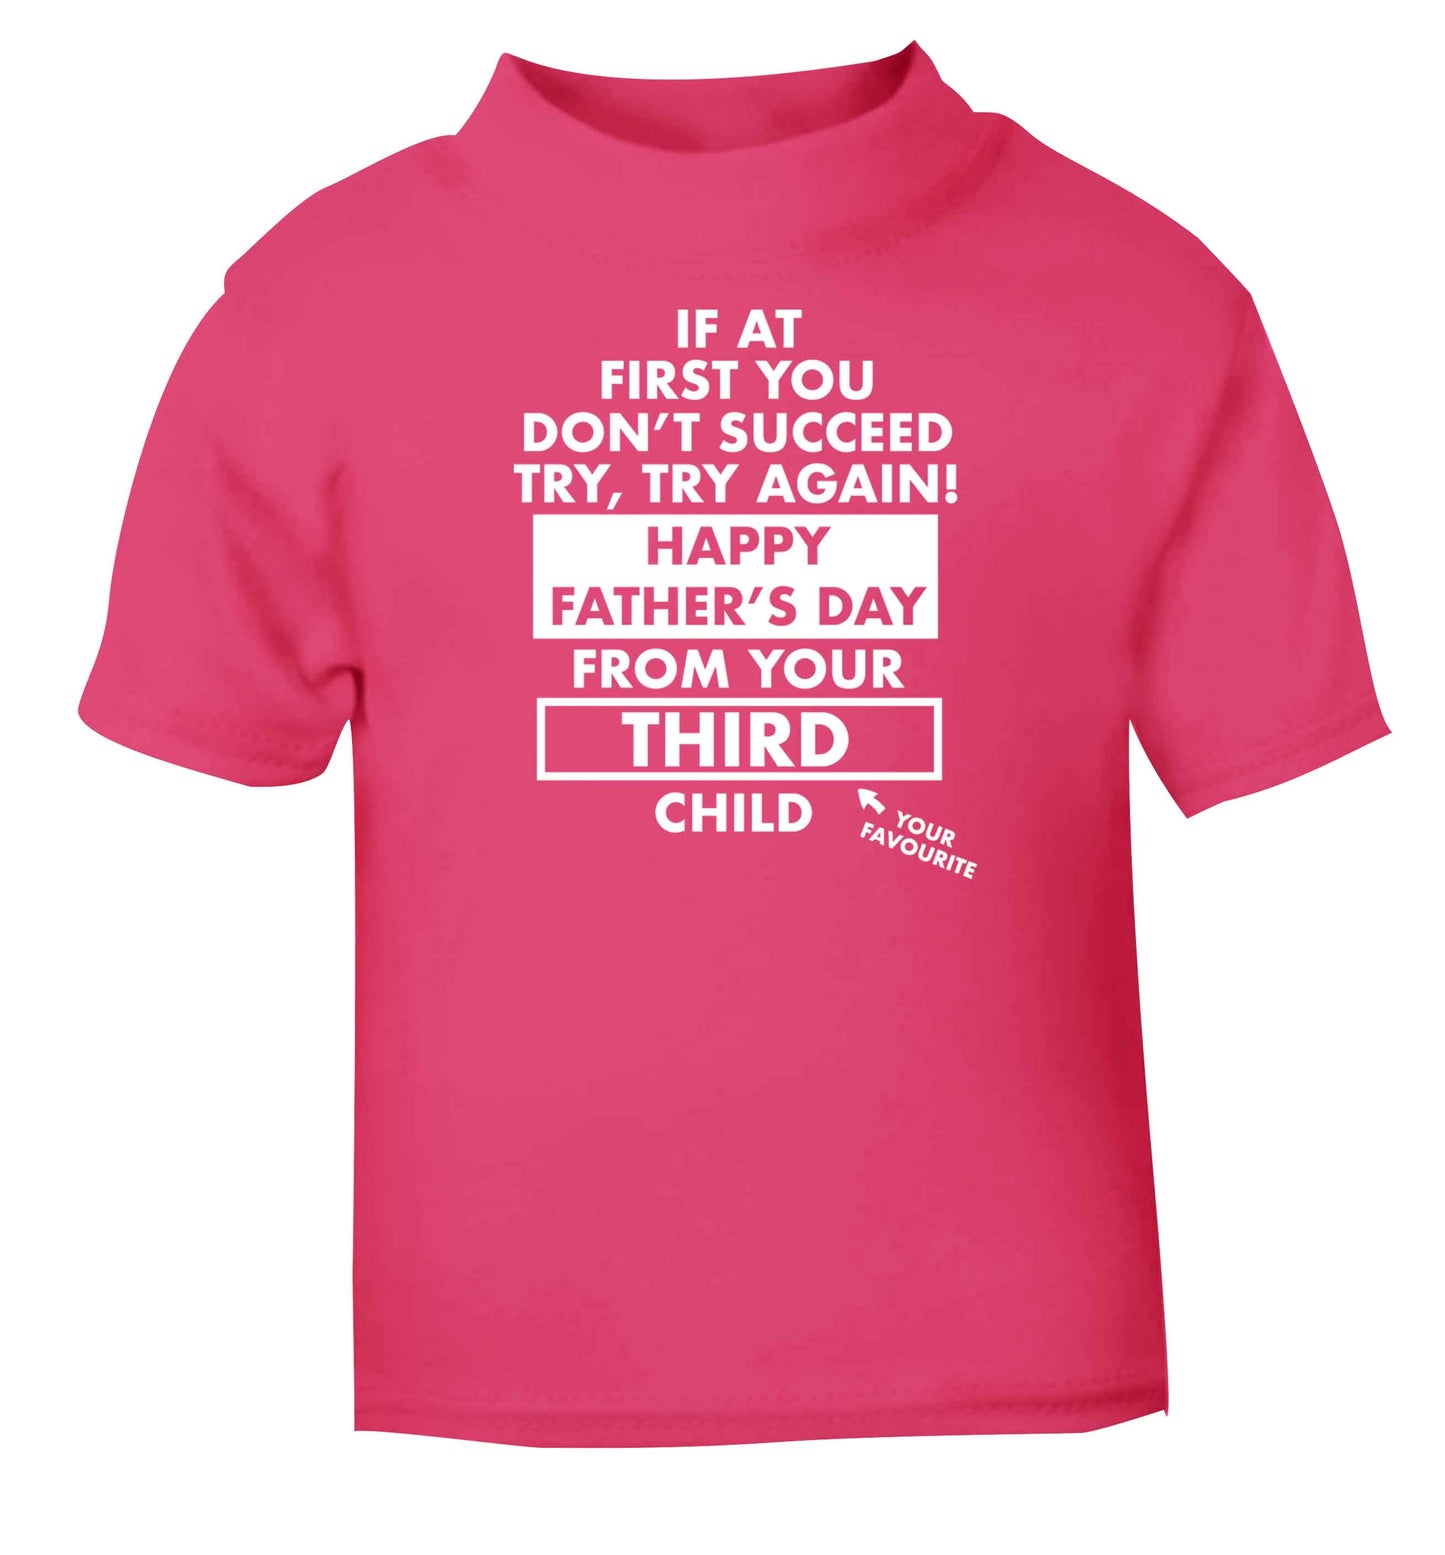 If at first you don't succeed try, try again Happy Father's day from your third child! pink baby toddler Tshirt 2 Years